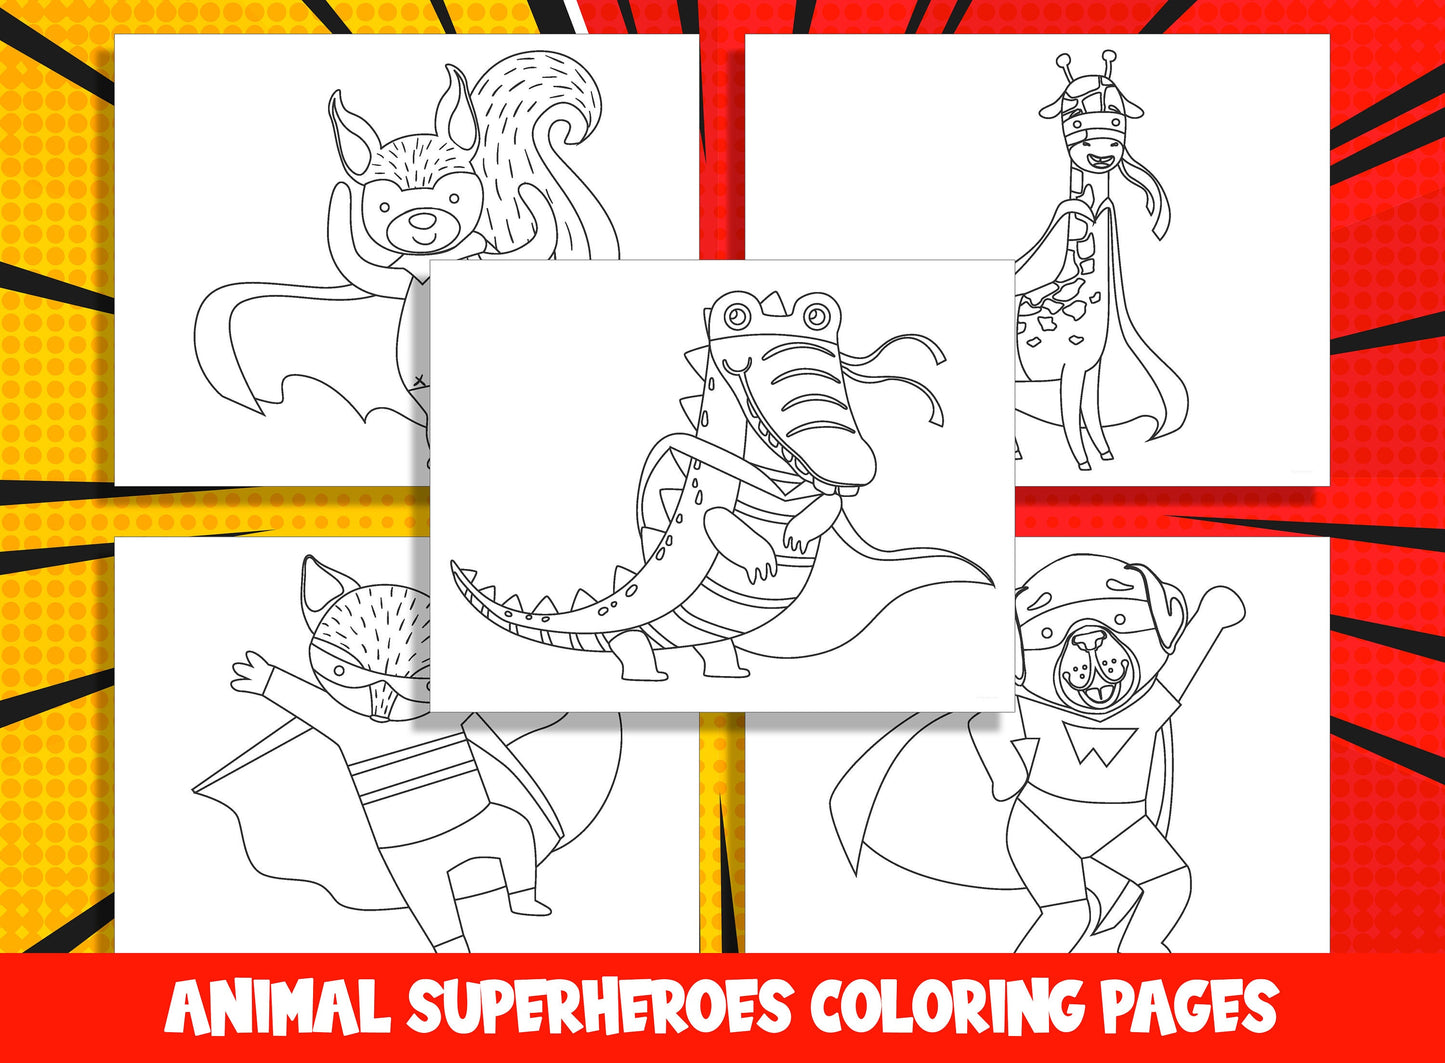 Animal Superheroes Coloring Pages: 20 Epic Designs, PDF File, Instant Download